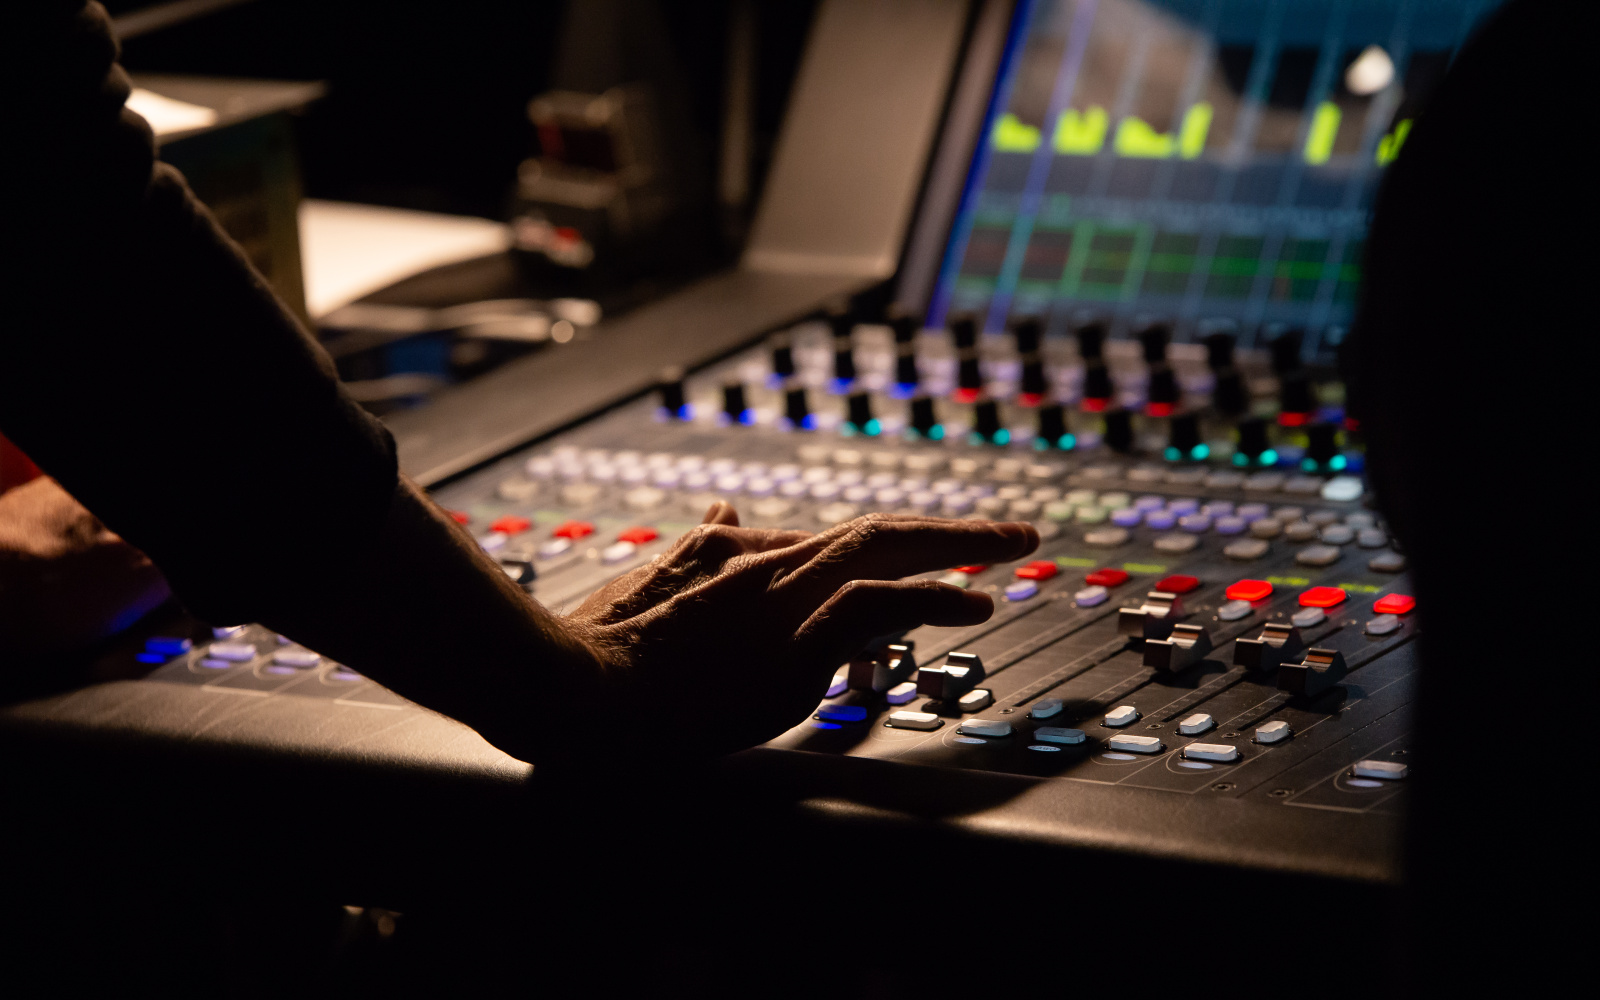 A hand operates a sound mixer in the dark at an event